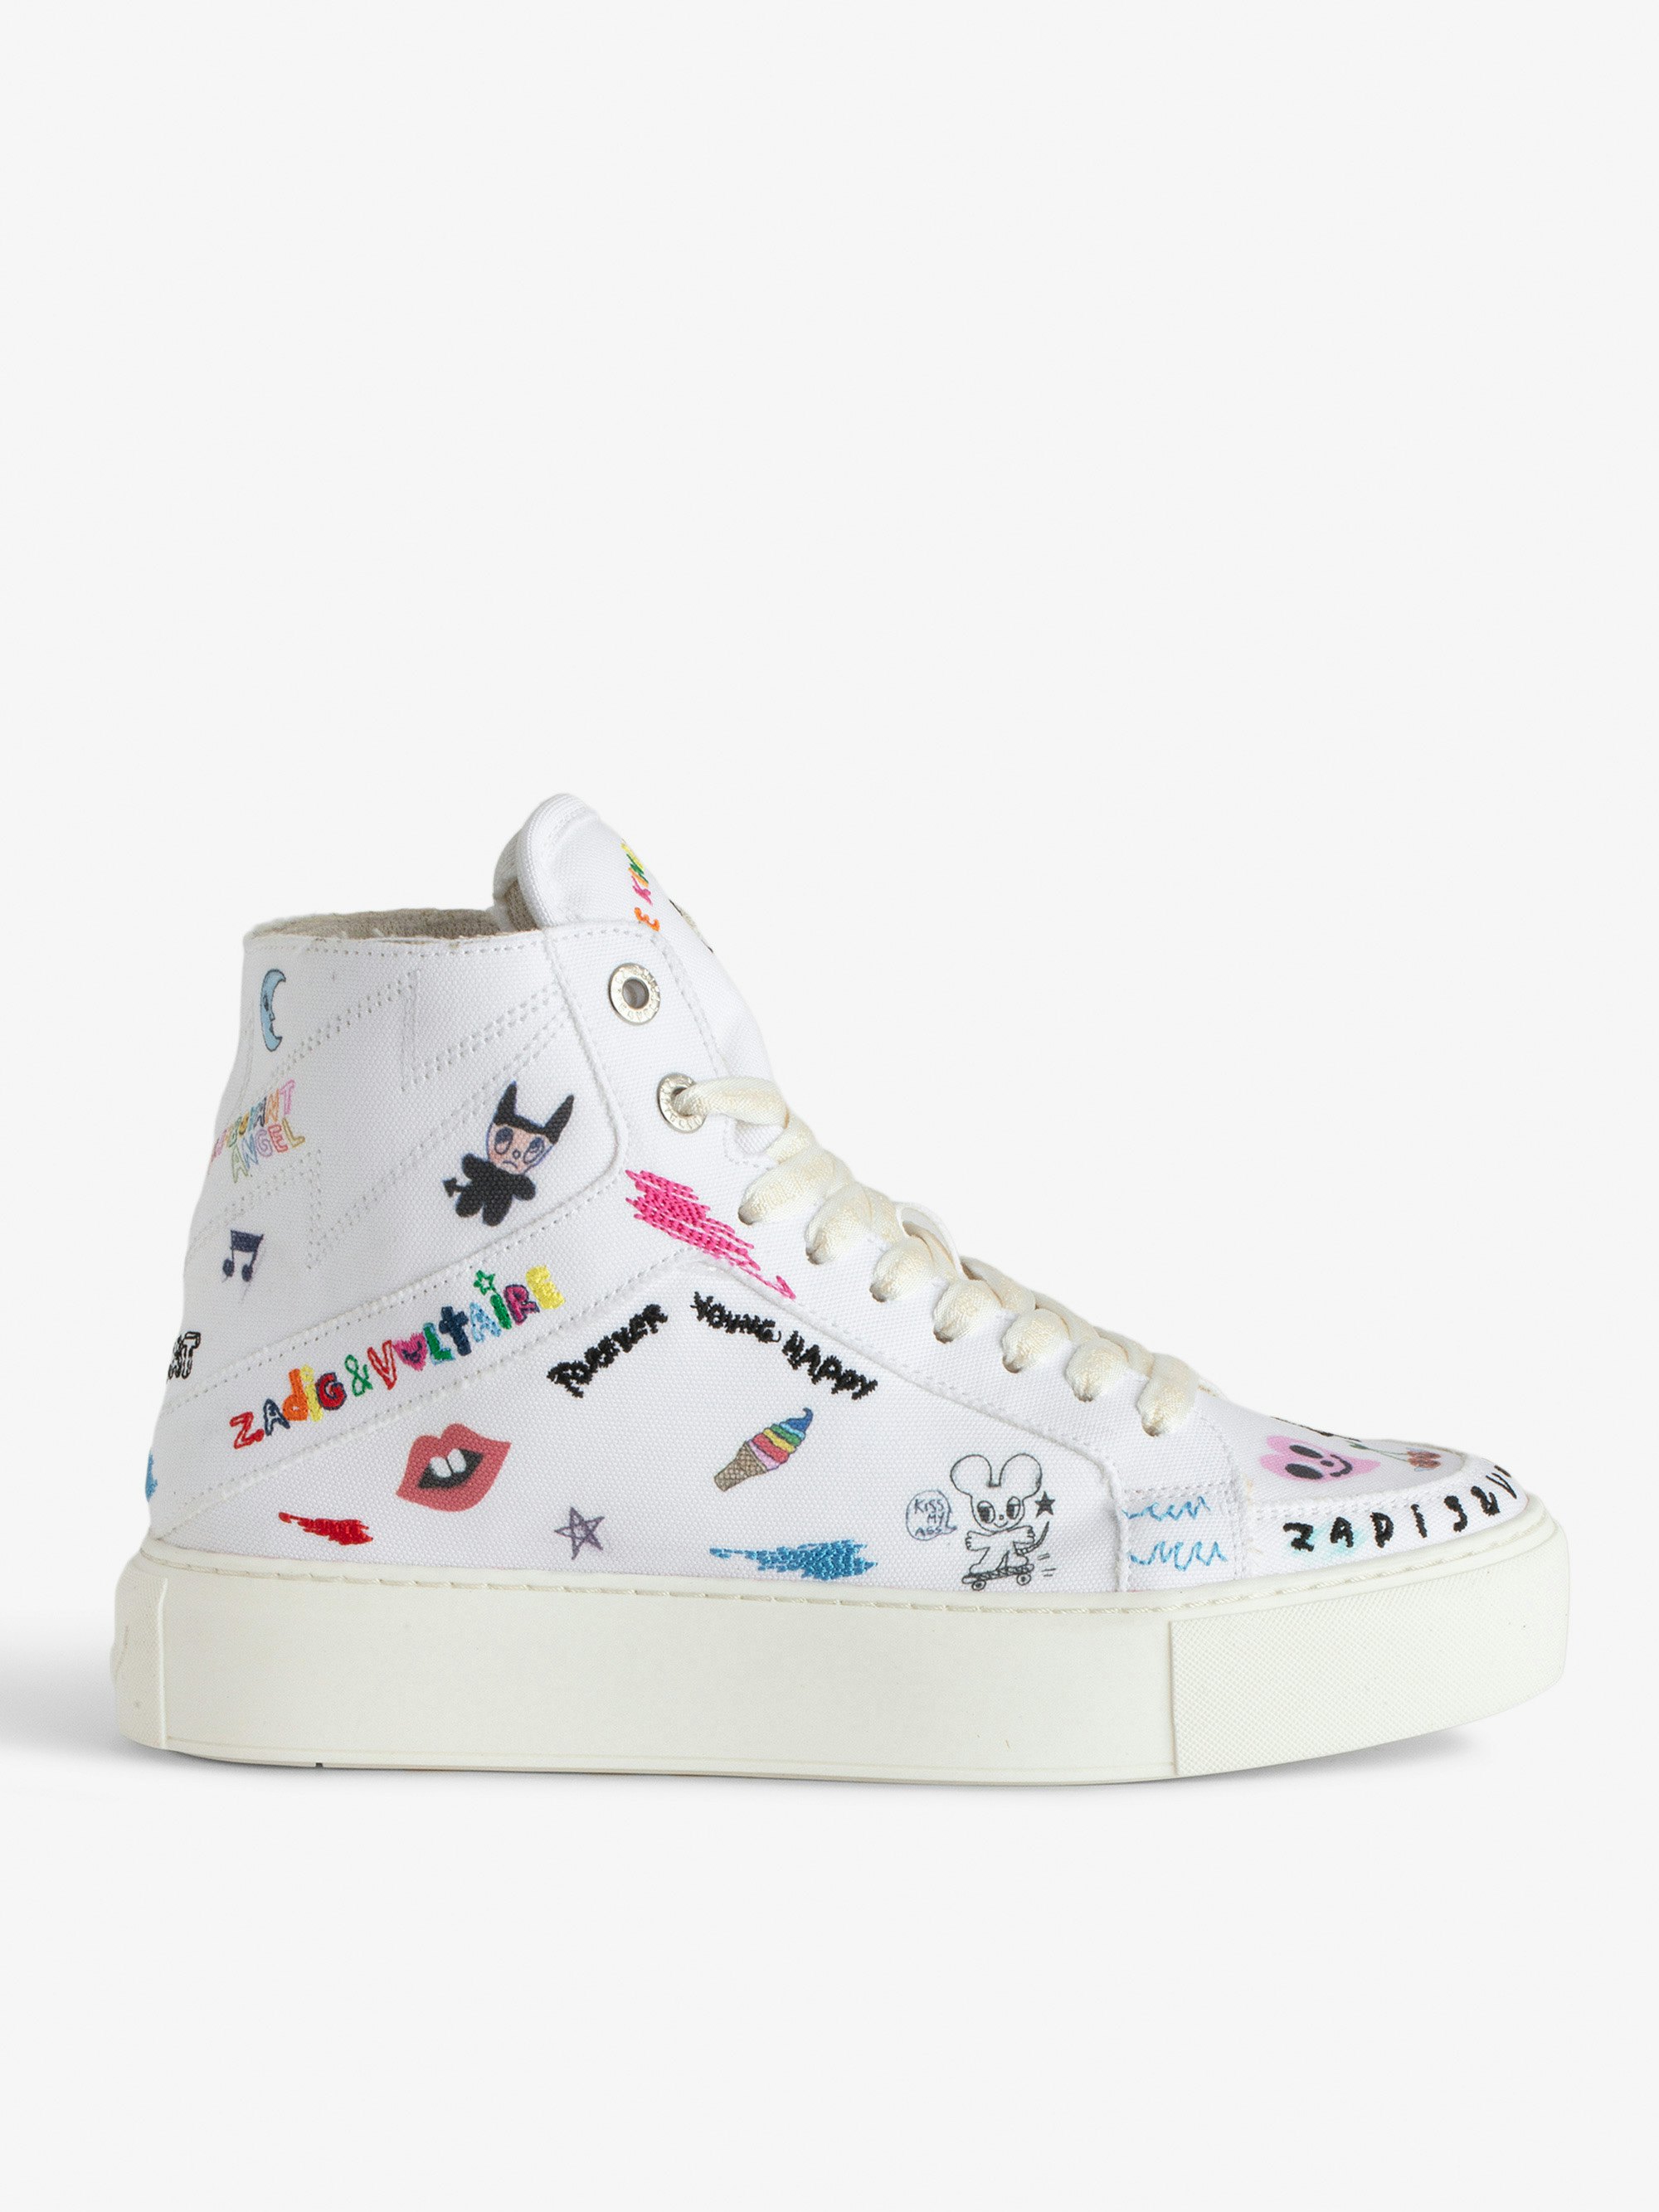 ZV1747 High Flash Chunky High-Top Sneakers - White canvas high-top trainers with chunky sole and customized details designed by Humberto Cruz.